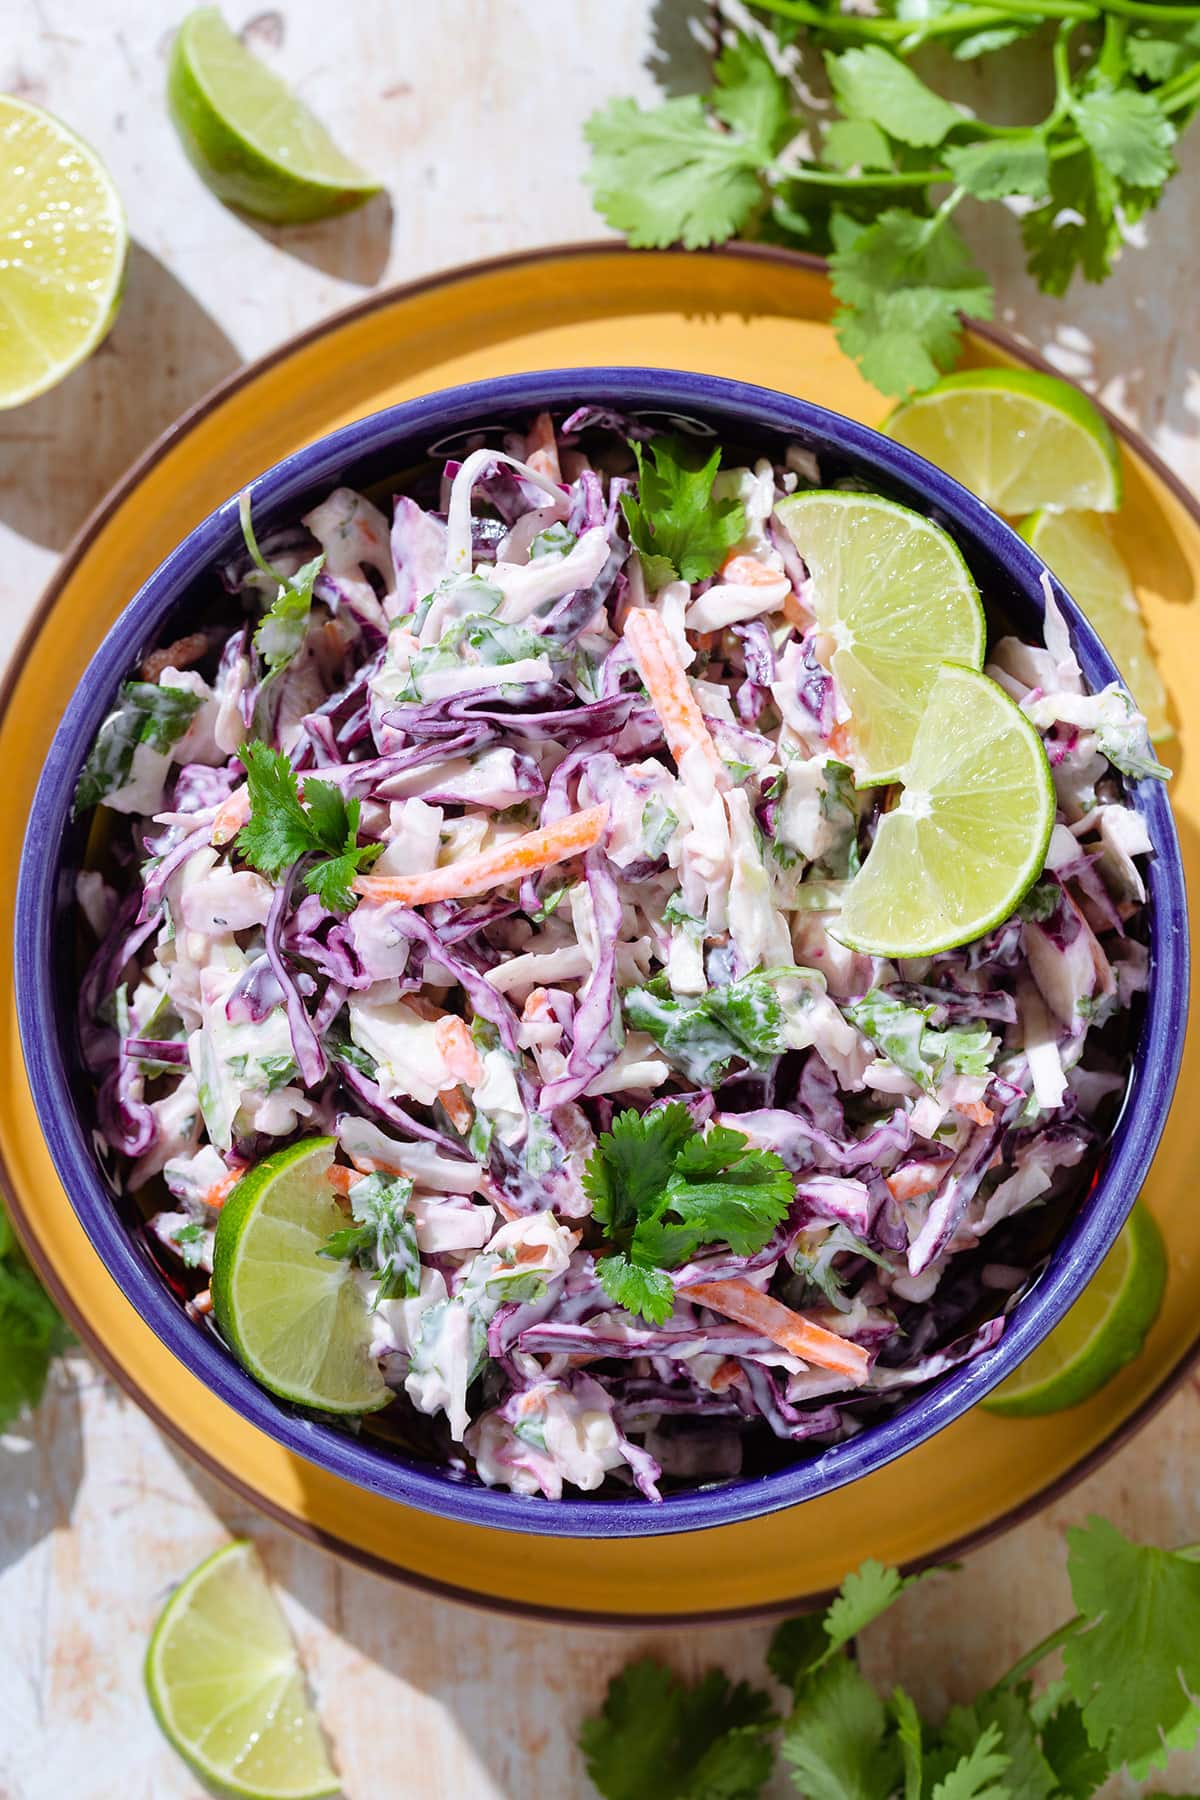 Colorful cilantro lime slaw with purple cabbage in a blue bowl garnished with lime slices on a yellow plate.